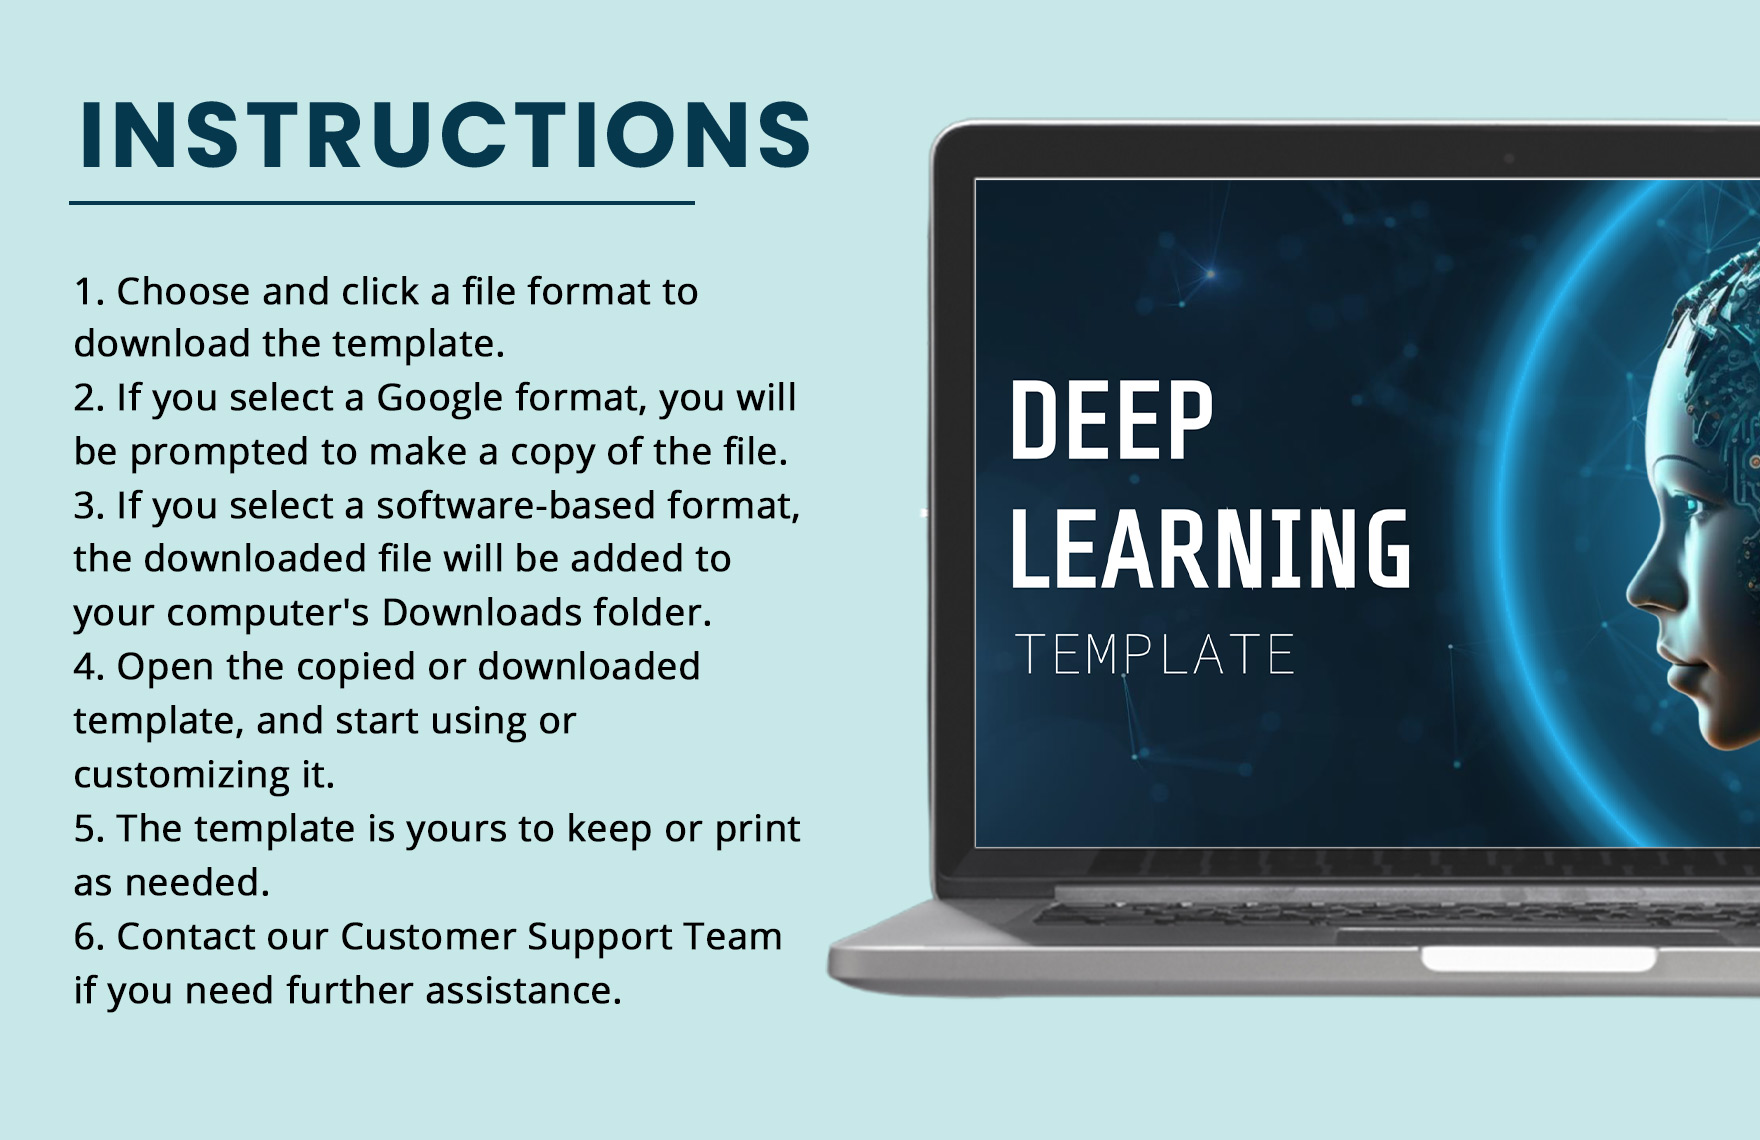 Deep Learning Template